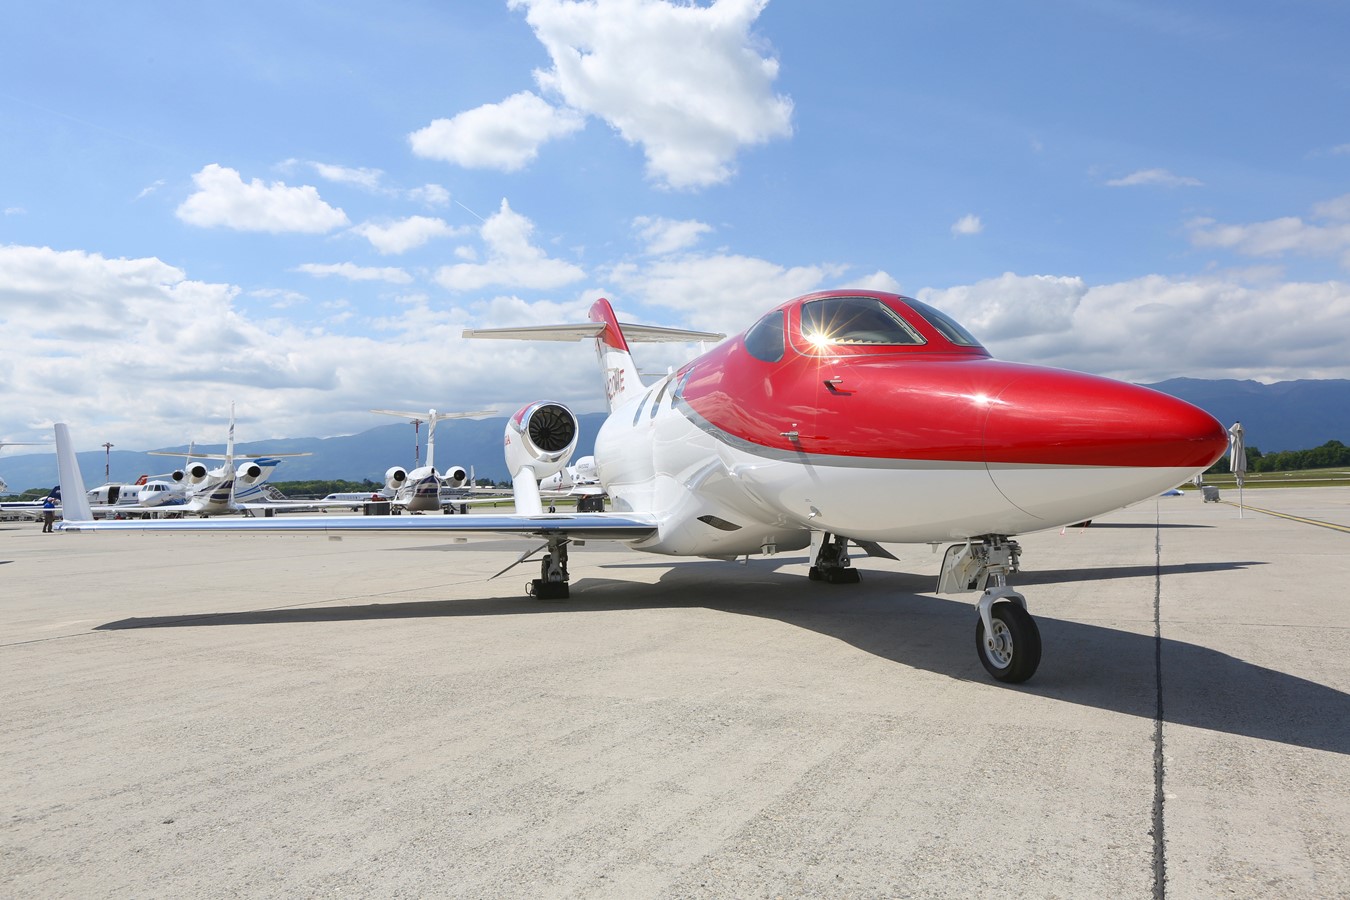 The HondaJet Makes its First Appearance in Europe